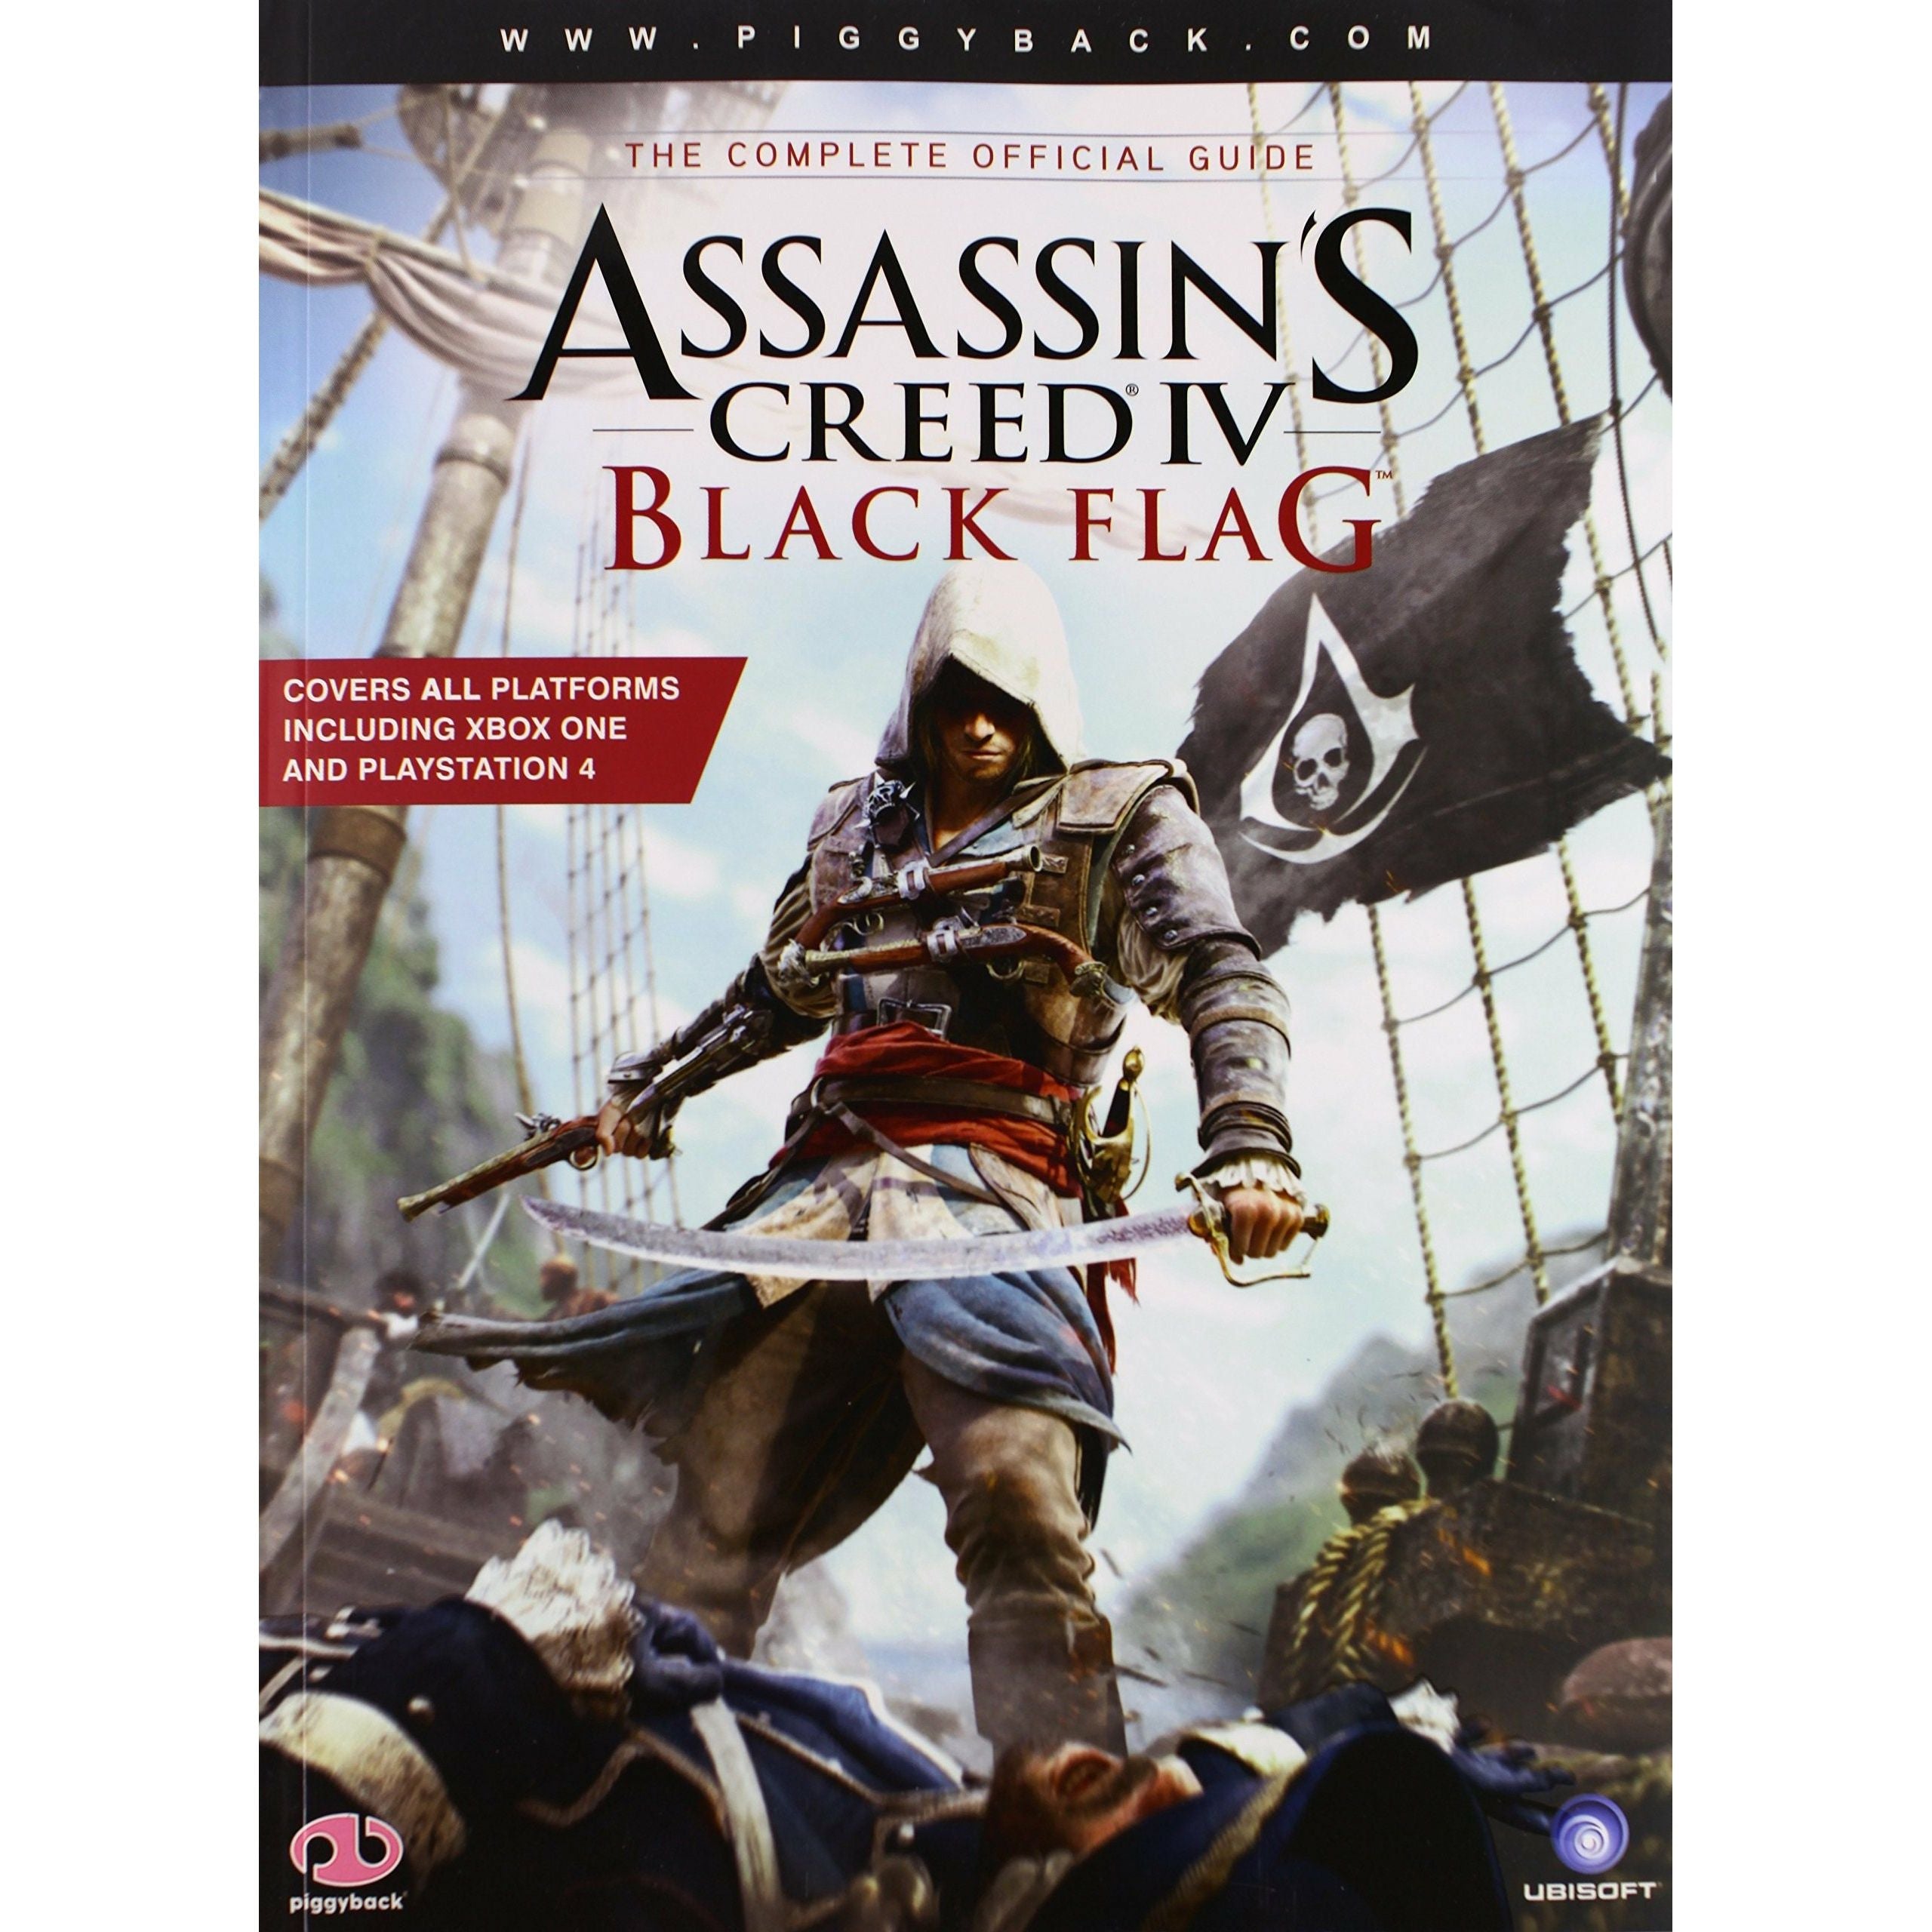 STRAT - Assassin's Creed IV Black Flag The Complete Official Guide by Piggyback